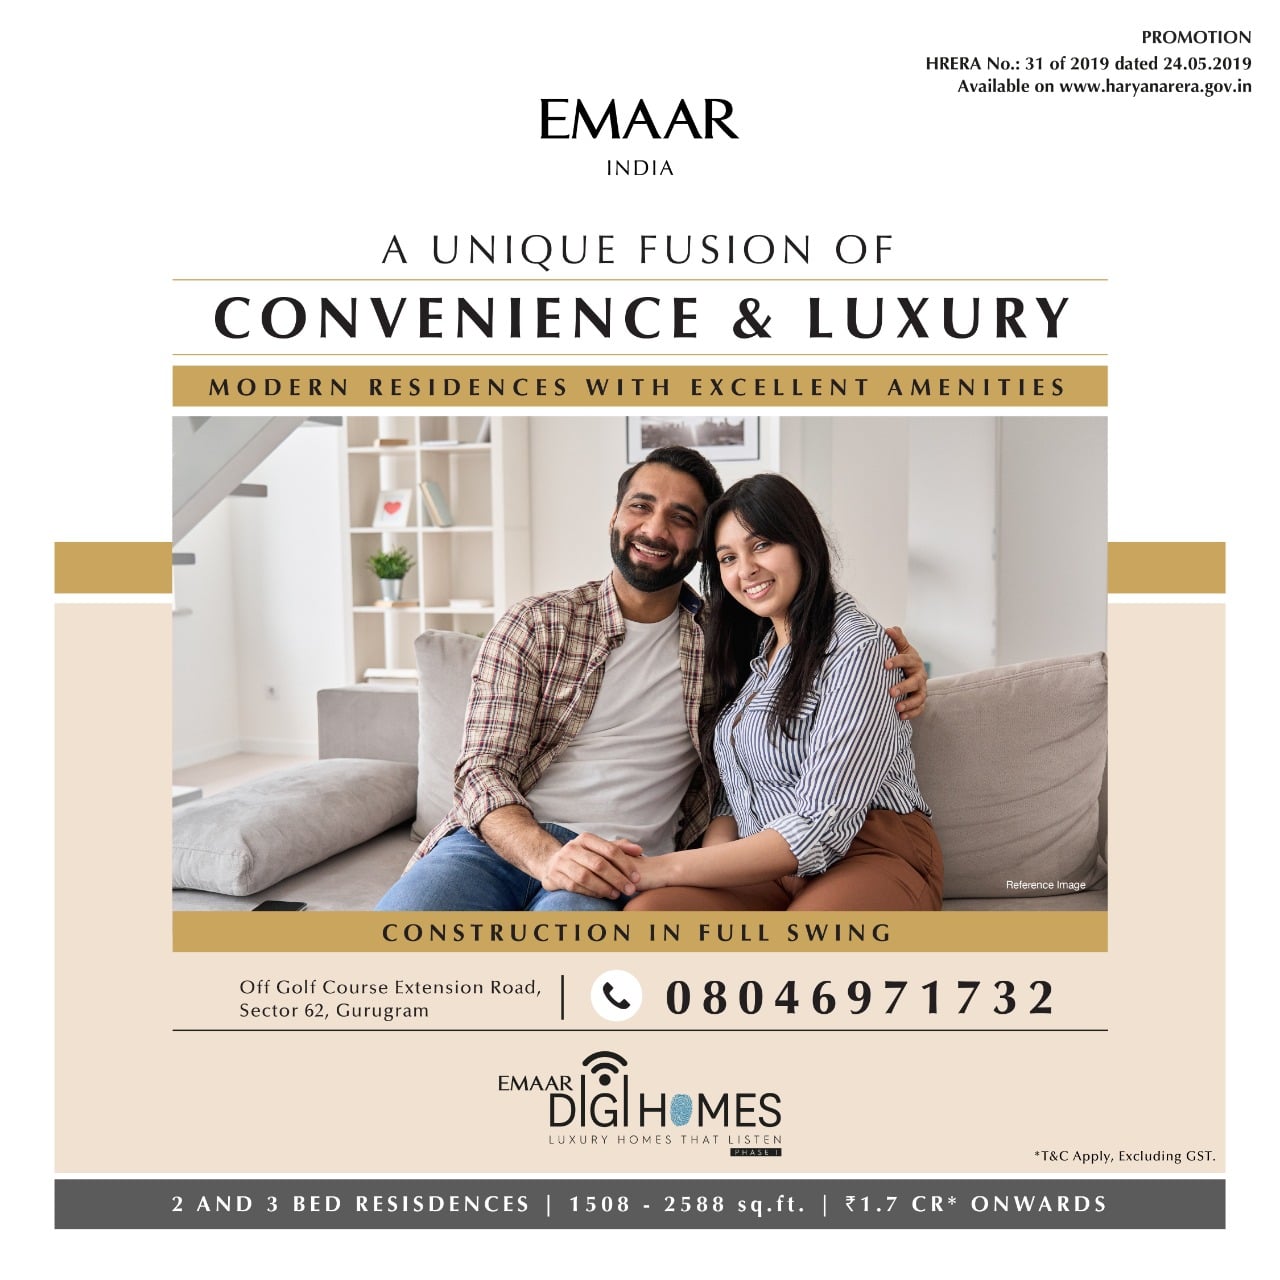 A unique fusion of convenience & luxury at Emaar Digi Homes in Gurgaon Update